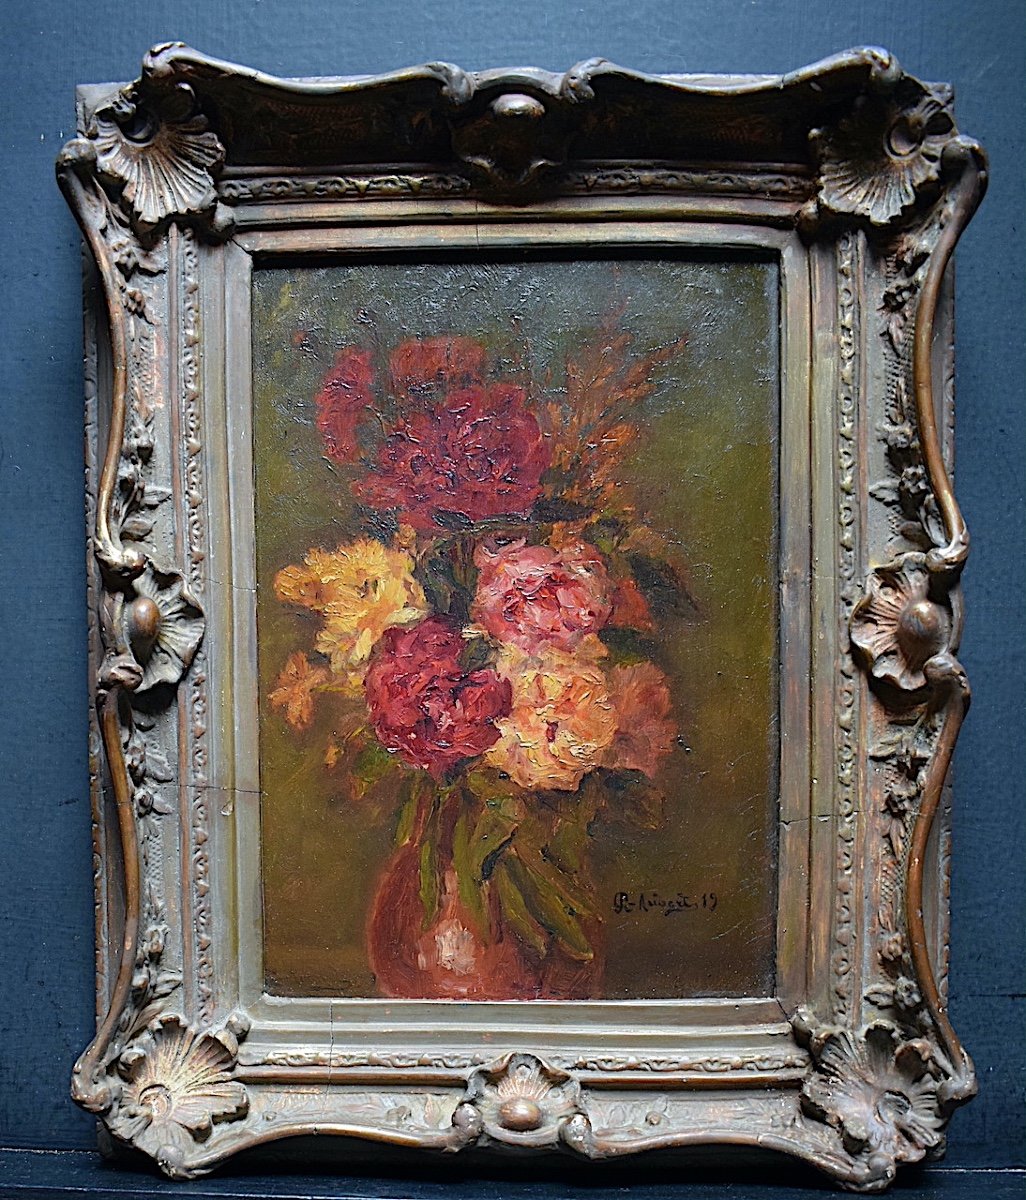 R Aubert Still Life With Flowers Signed Impressionist 1919 XX Rt627